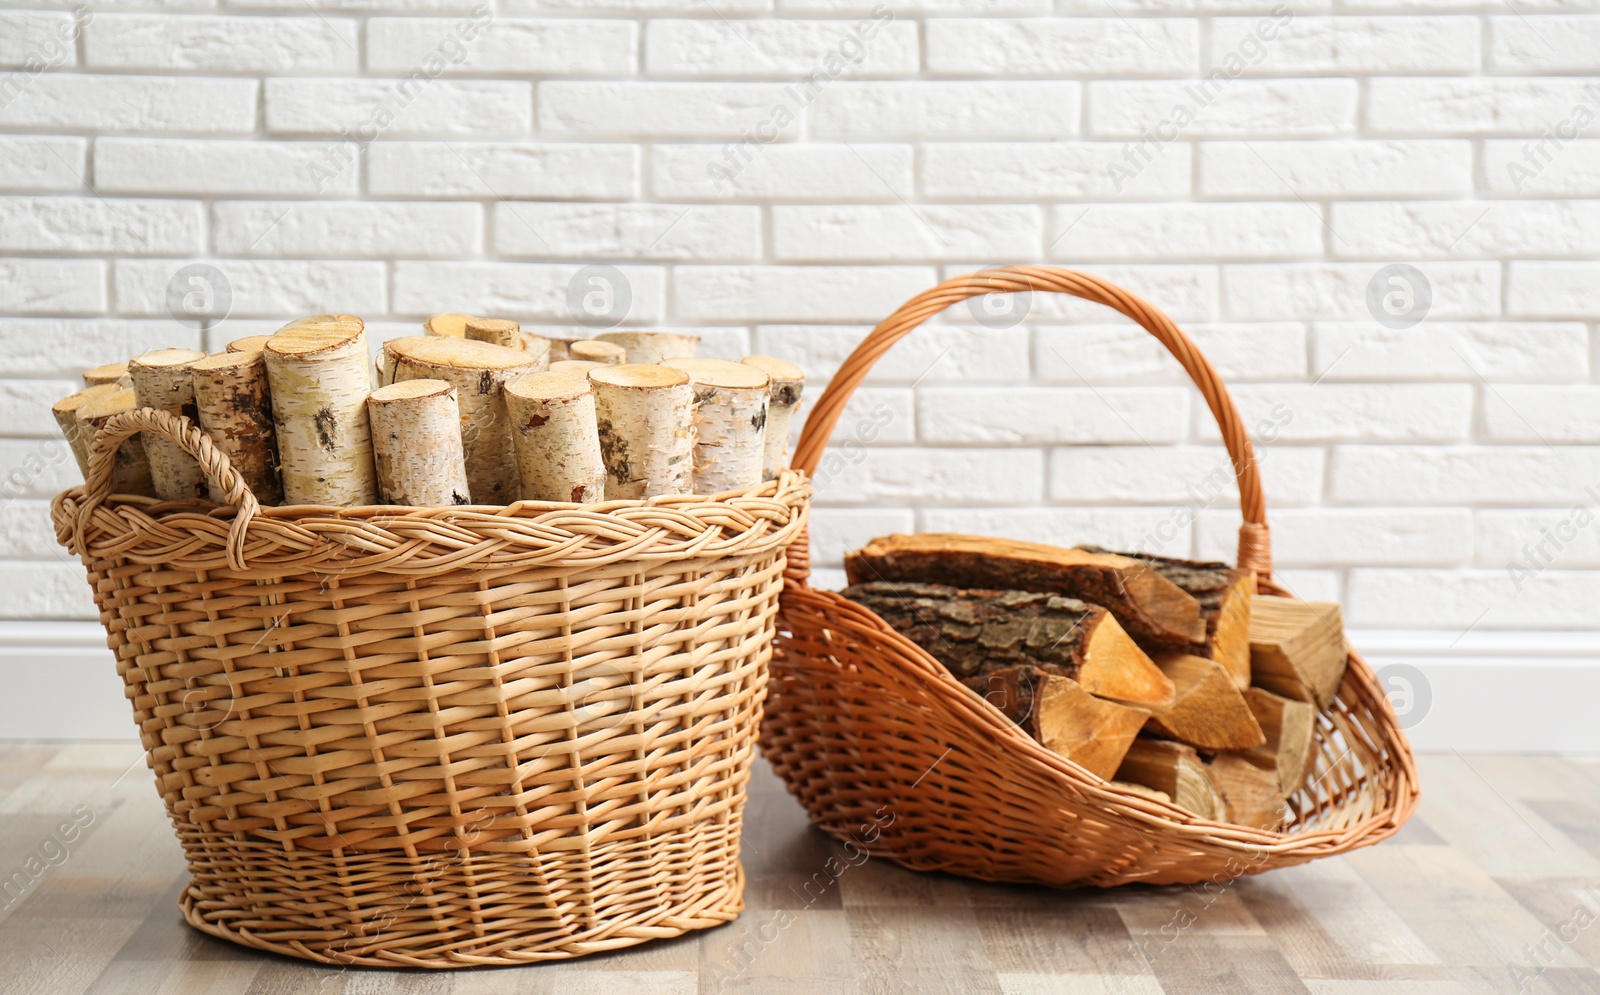 Photo of Wicker baskets with firewood near white brick wall indoors